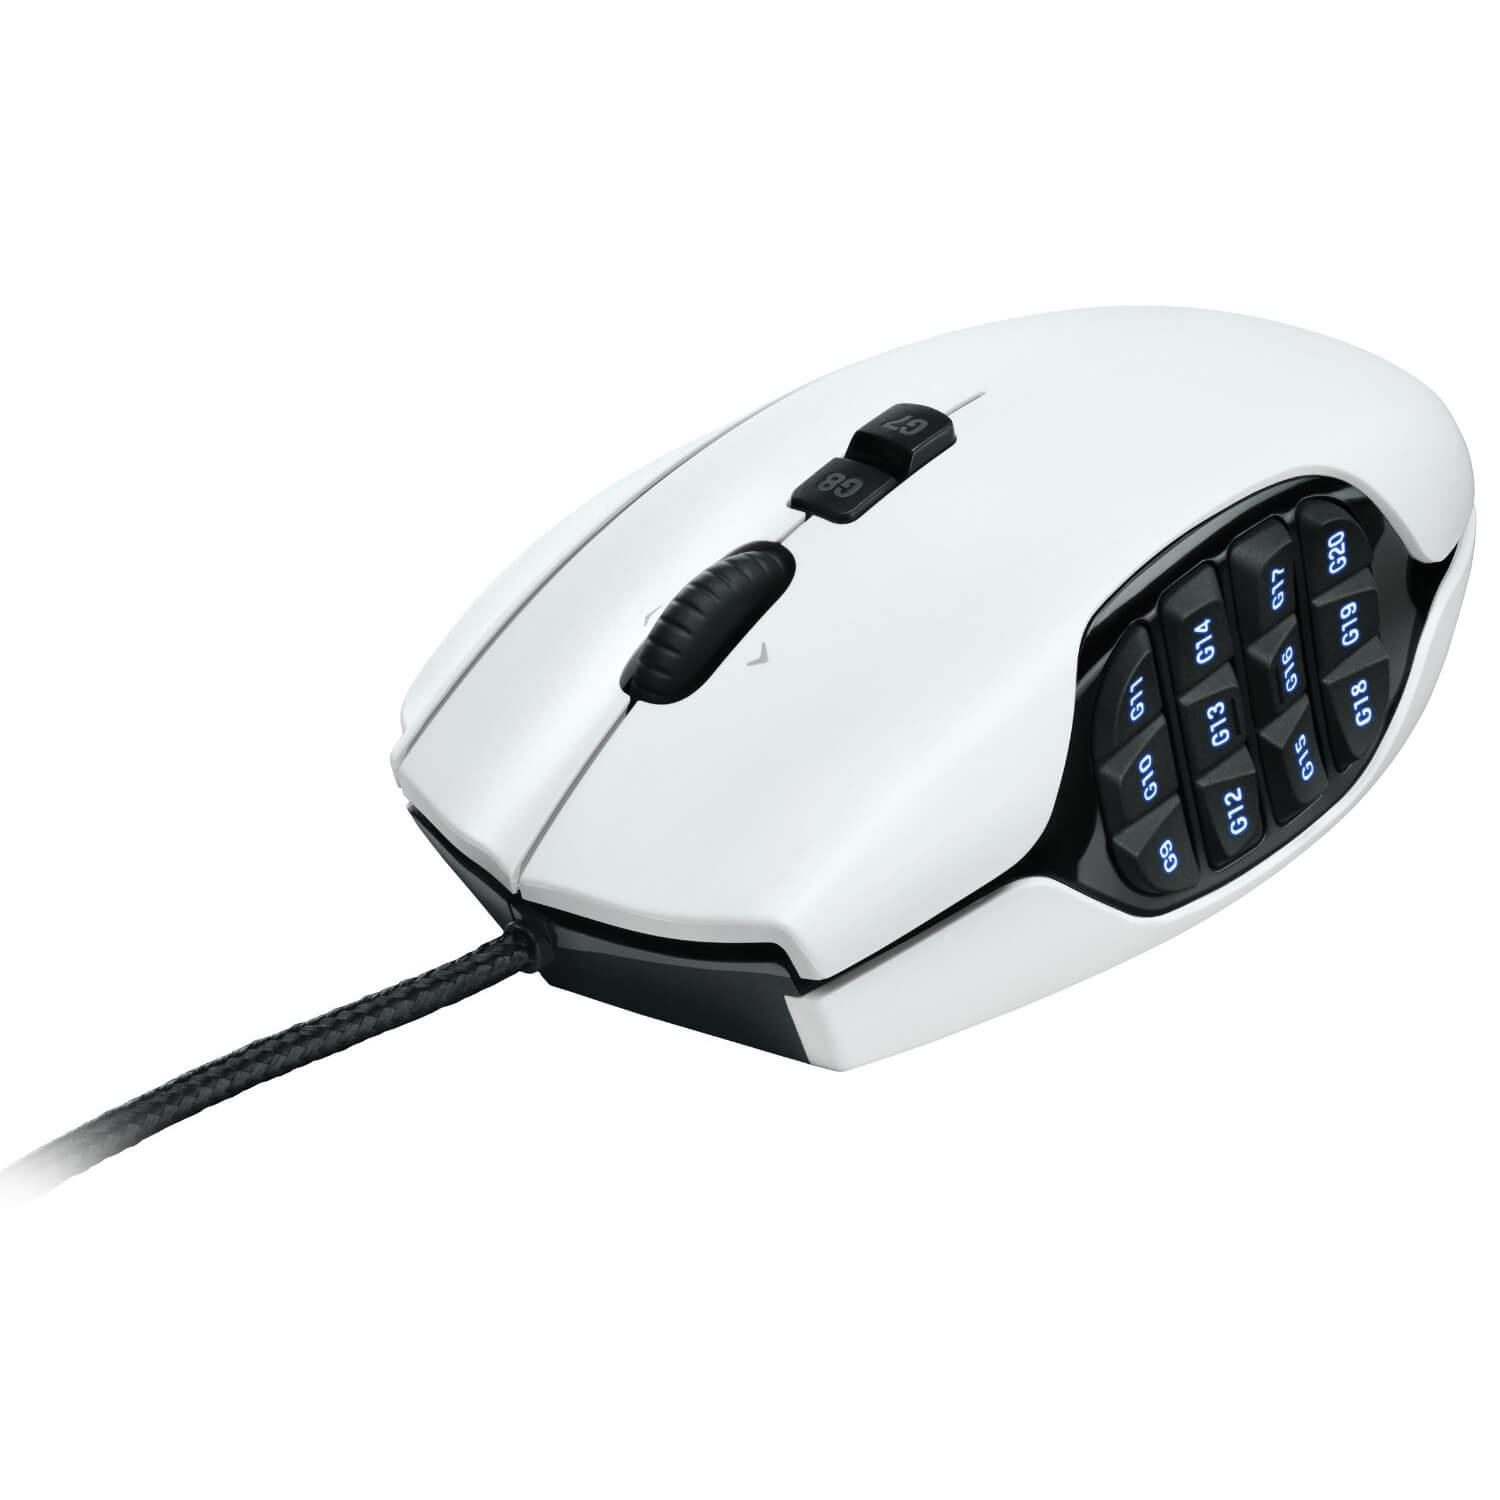  Mouse Gaming Logitech G600 MMO Alb 